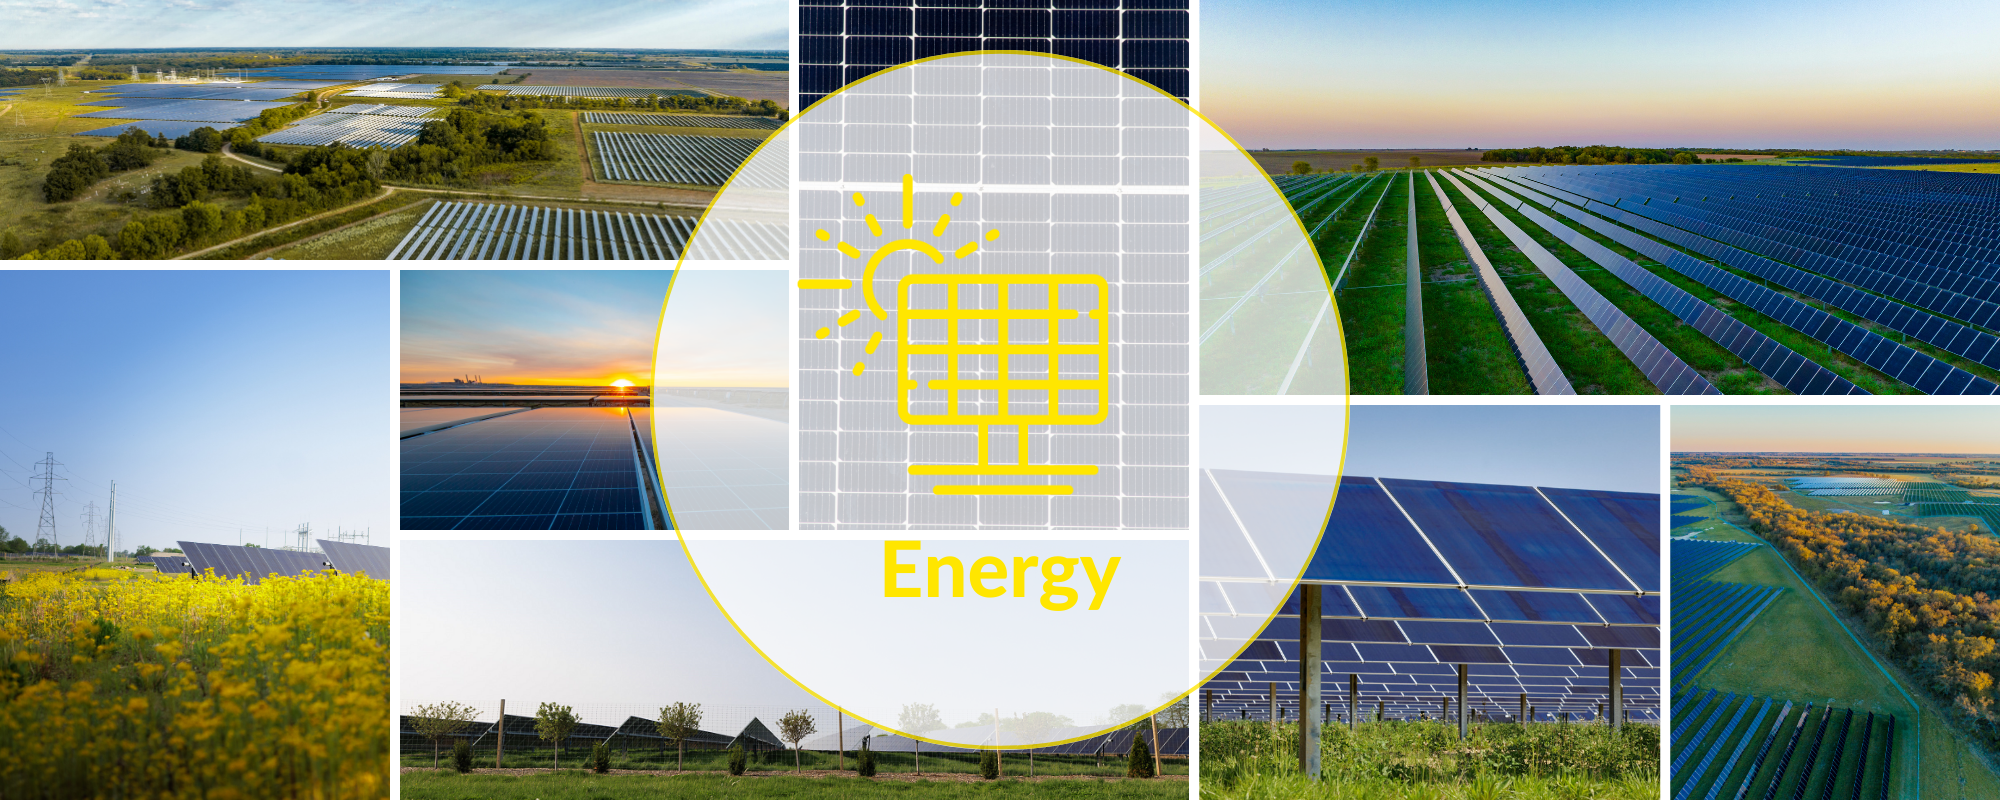 Responsible Solar energy icon over collage of utility-scale solar projects